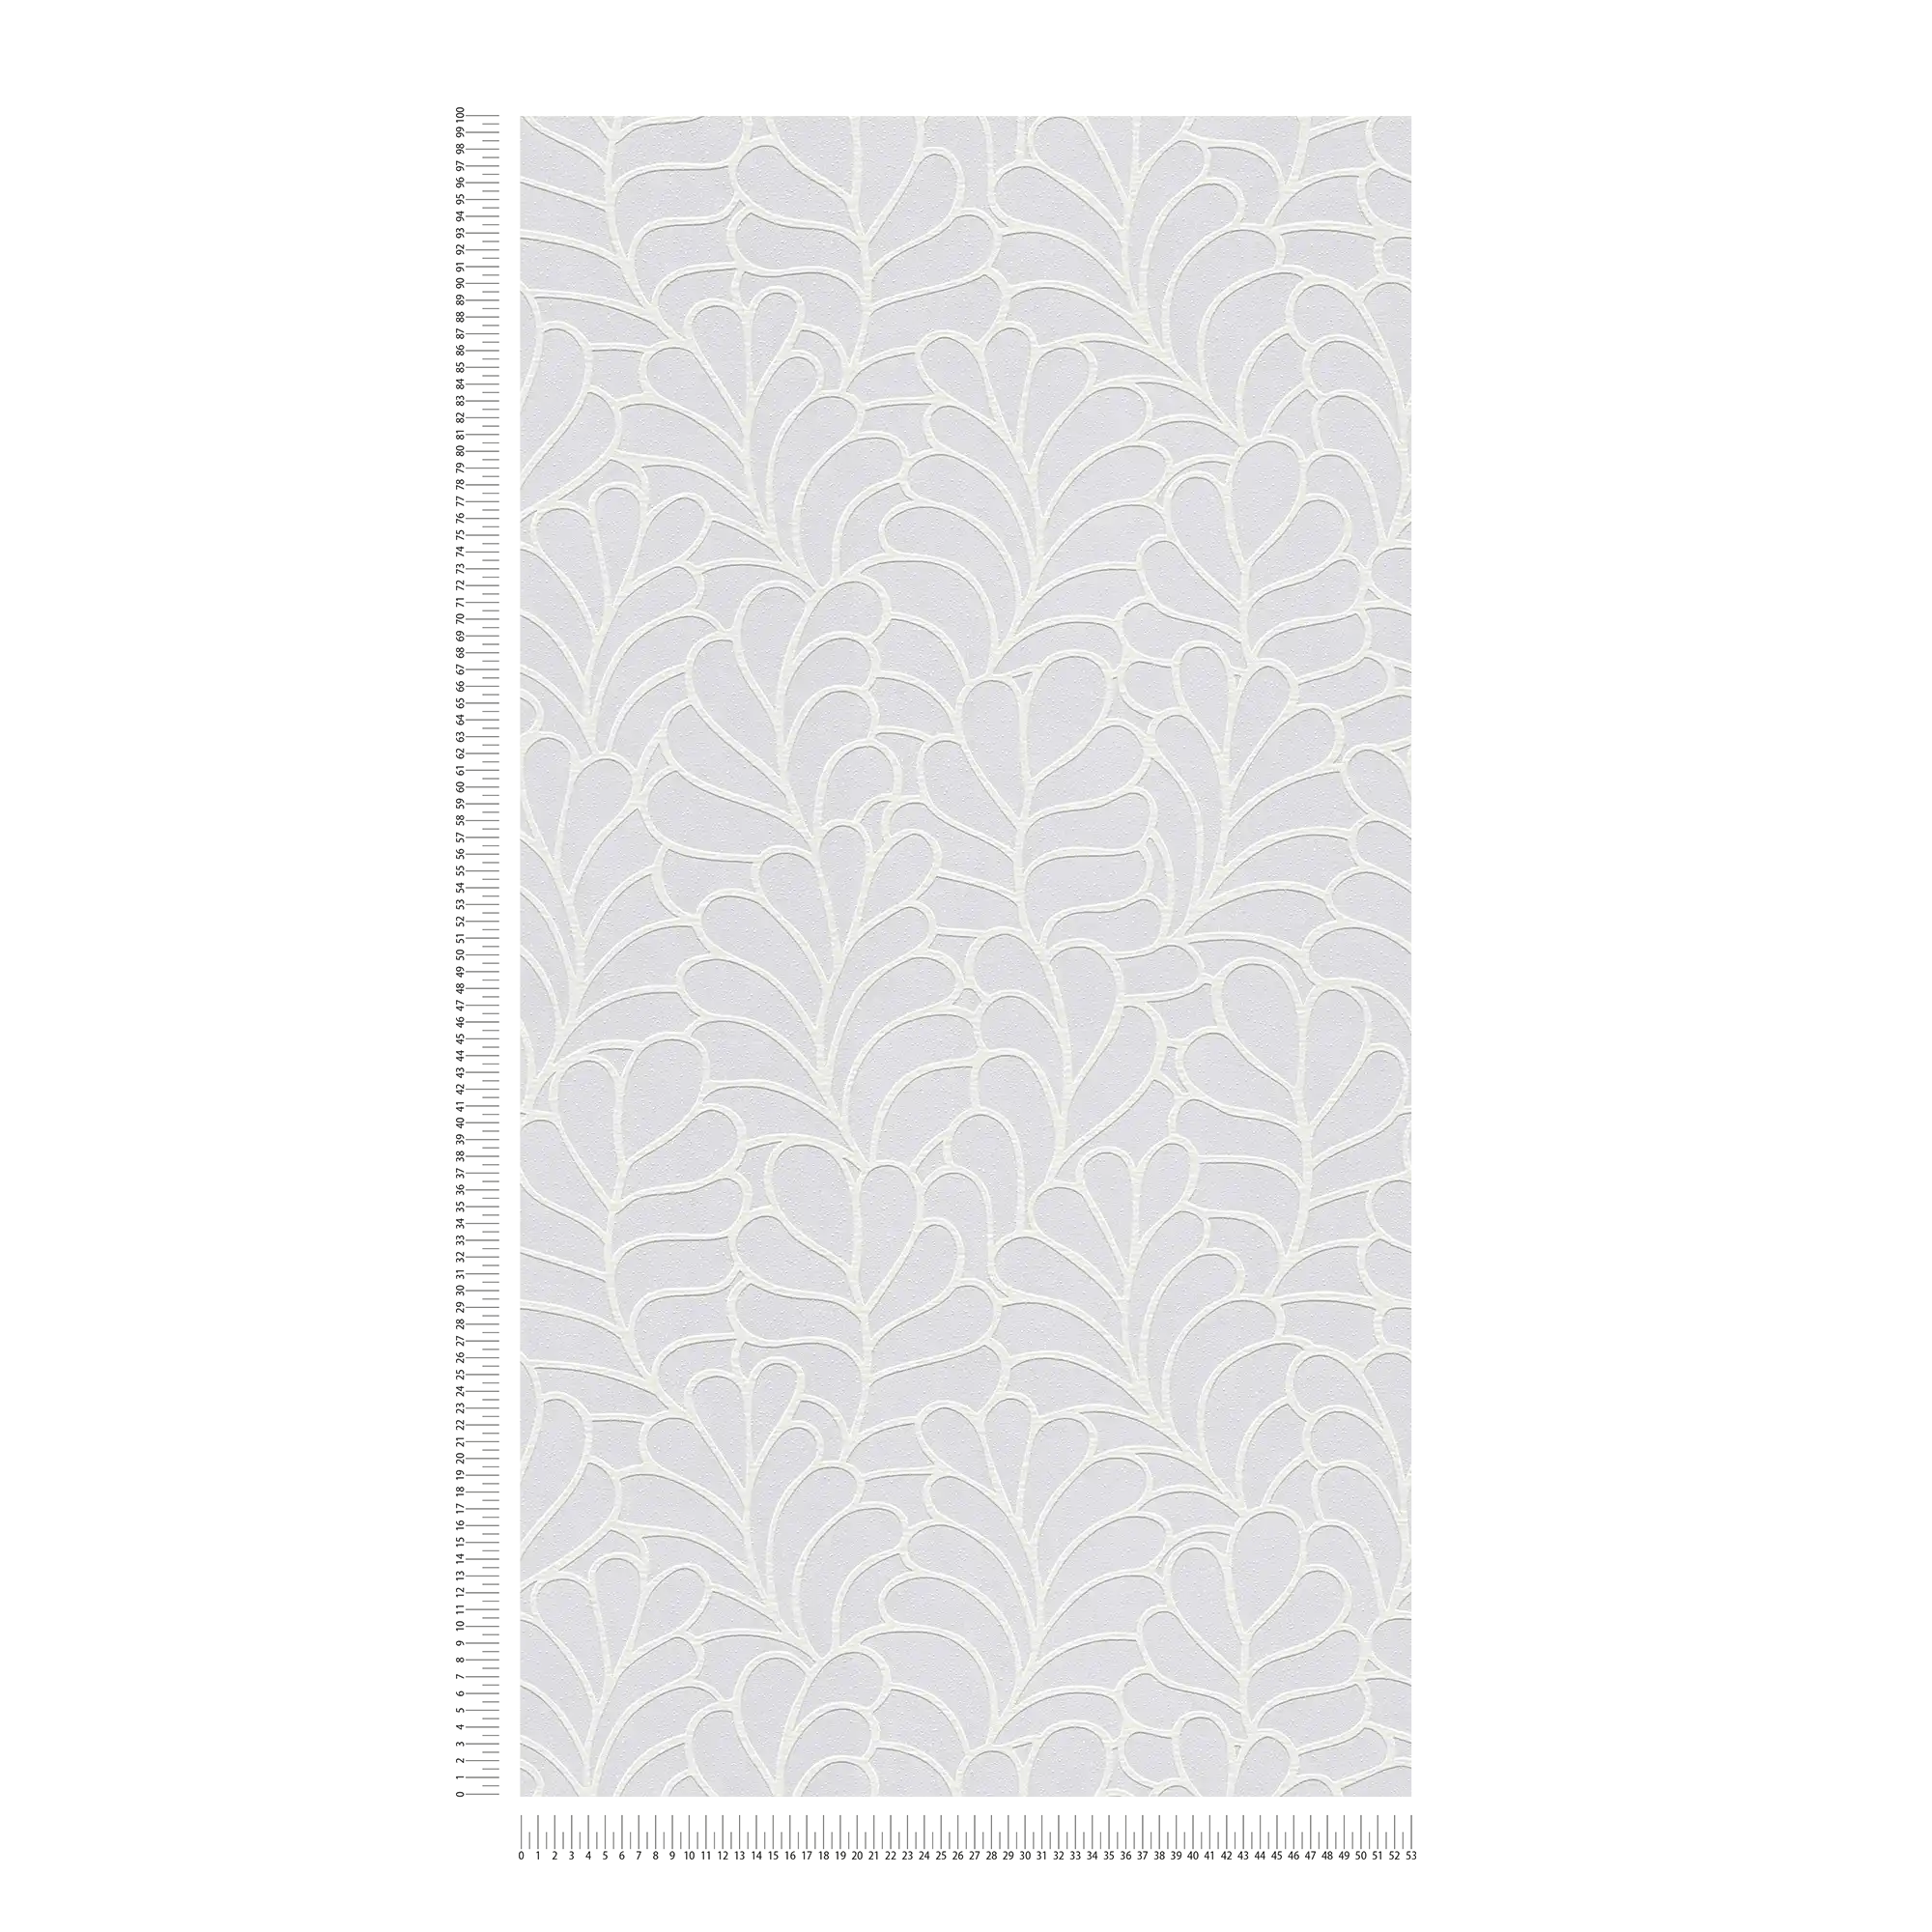             Paintable wallpaper with floral leaf pattern - Paintable
        